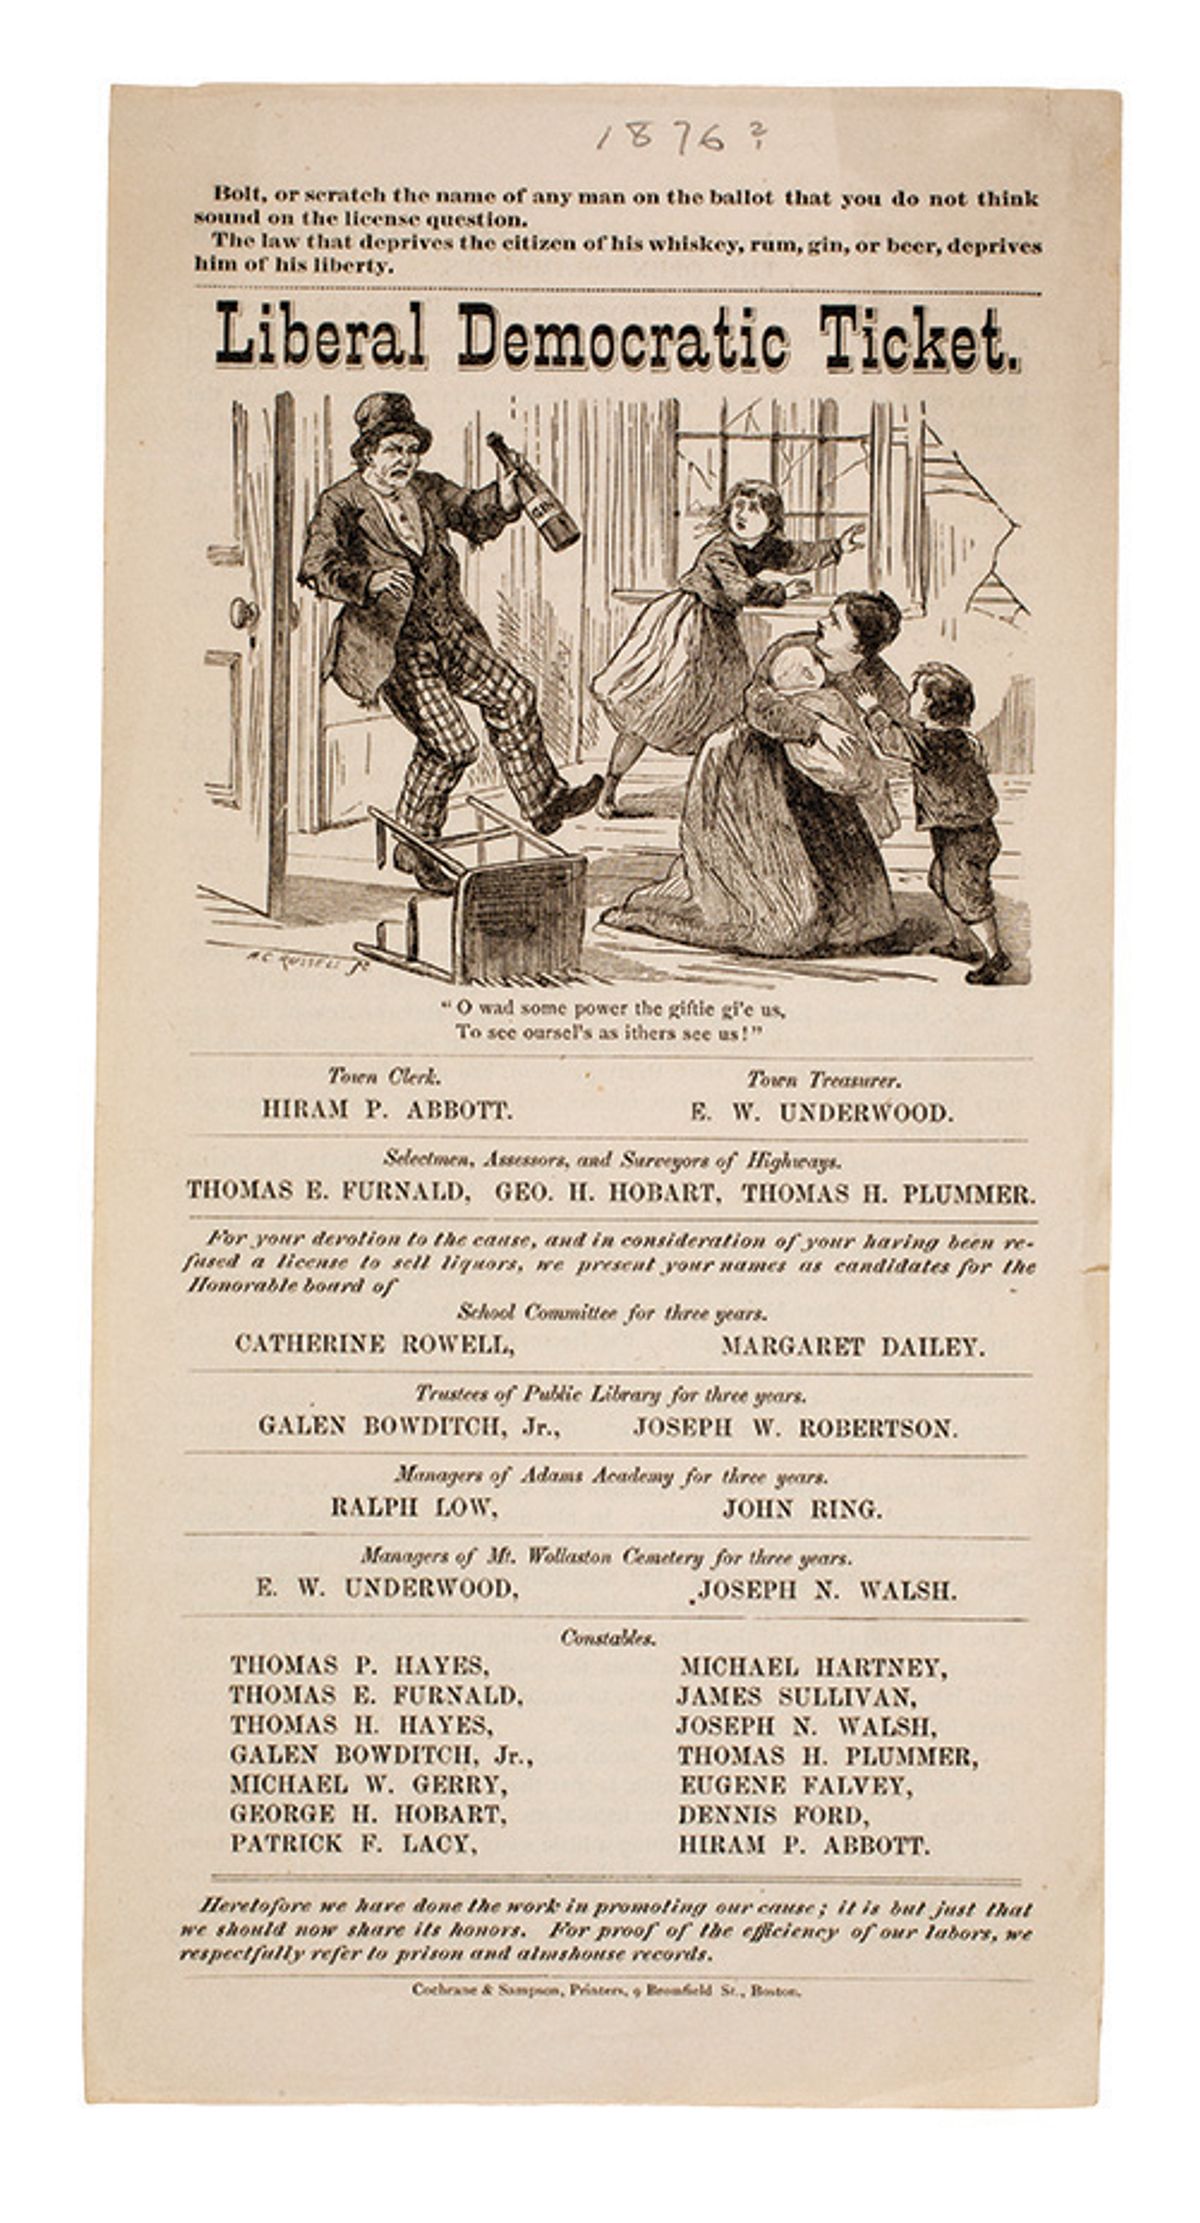 Temperance tickets, Boston (around 1876). Voters were asked to “scratch the name of any man on the ballot that you do not think sound.” Courtesy of the Cooper Union